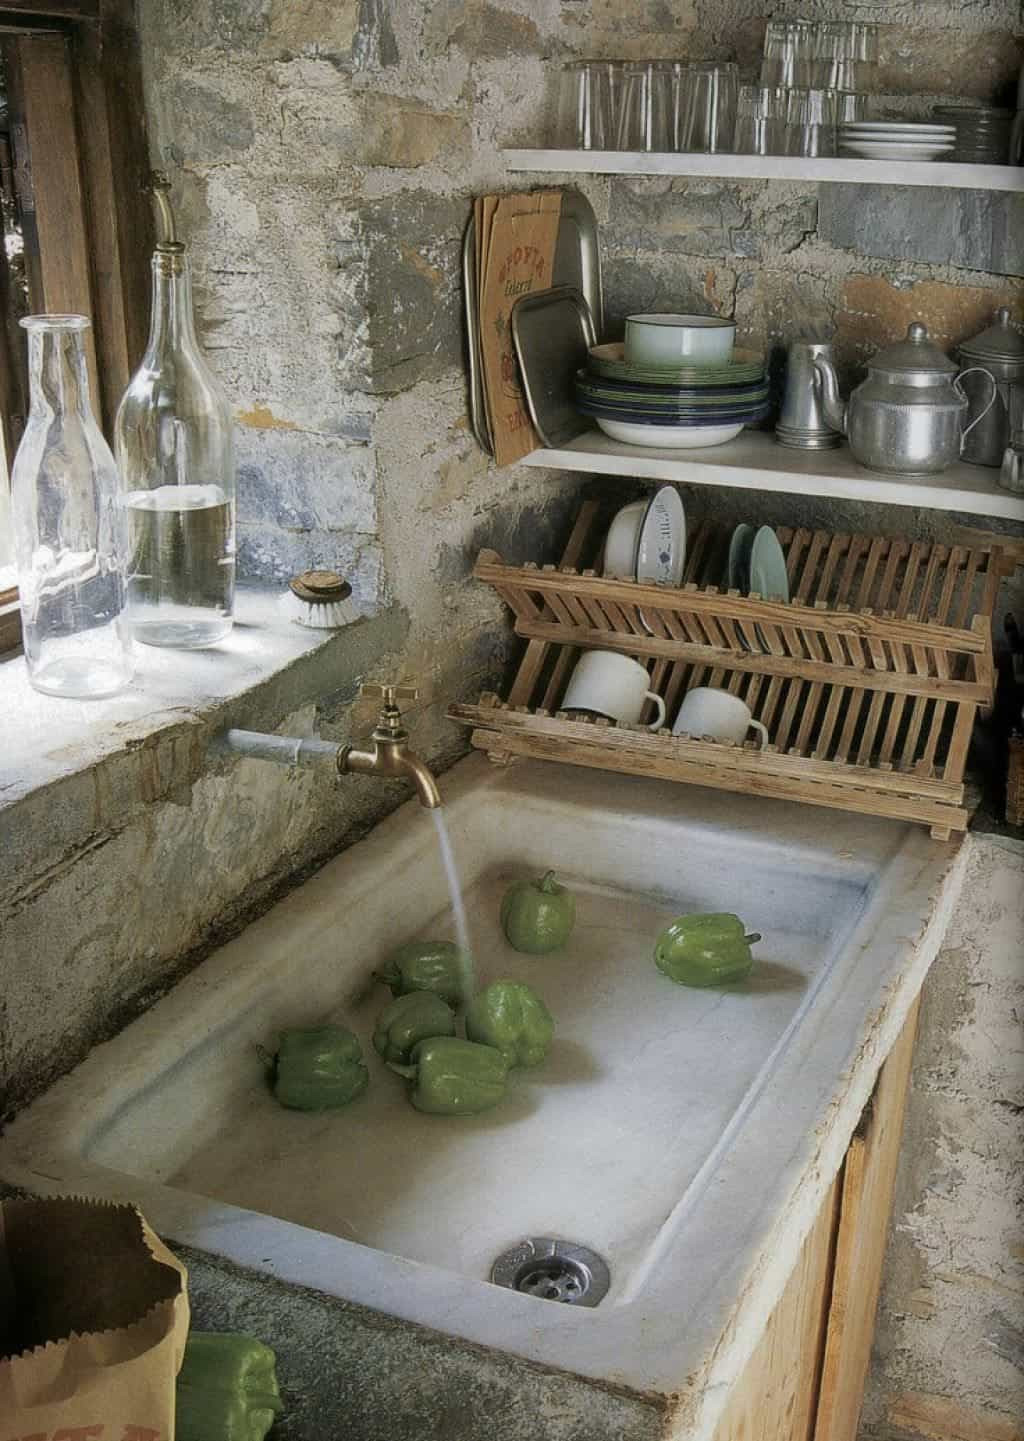 Rustic Kitchen Sink
 Provence Rustic Kitchen With Open Shelves And Stone Walls